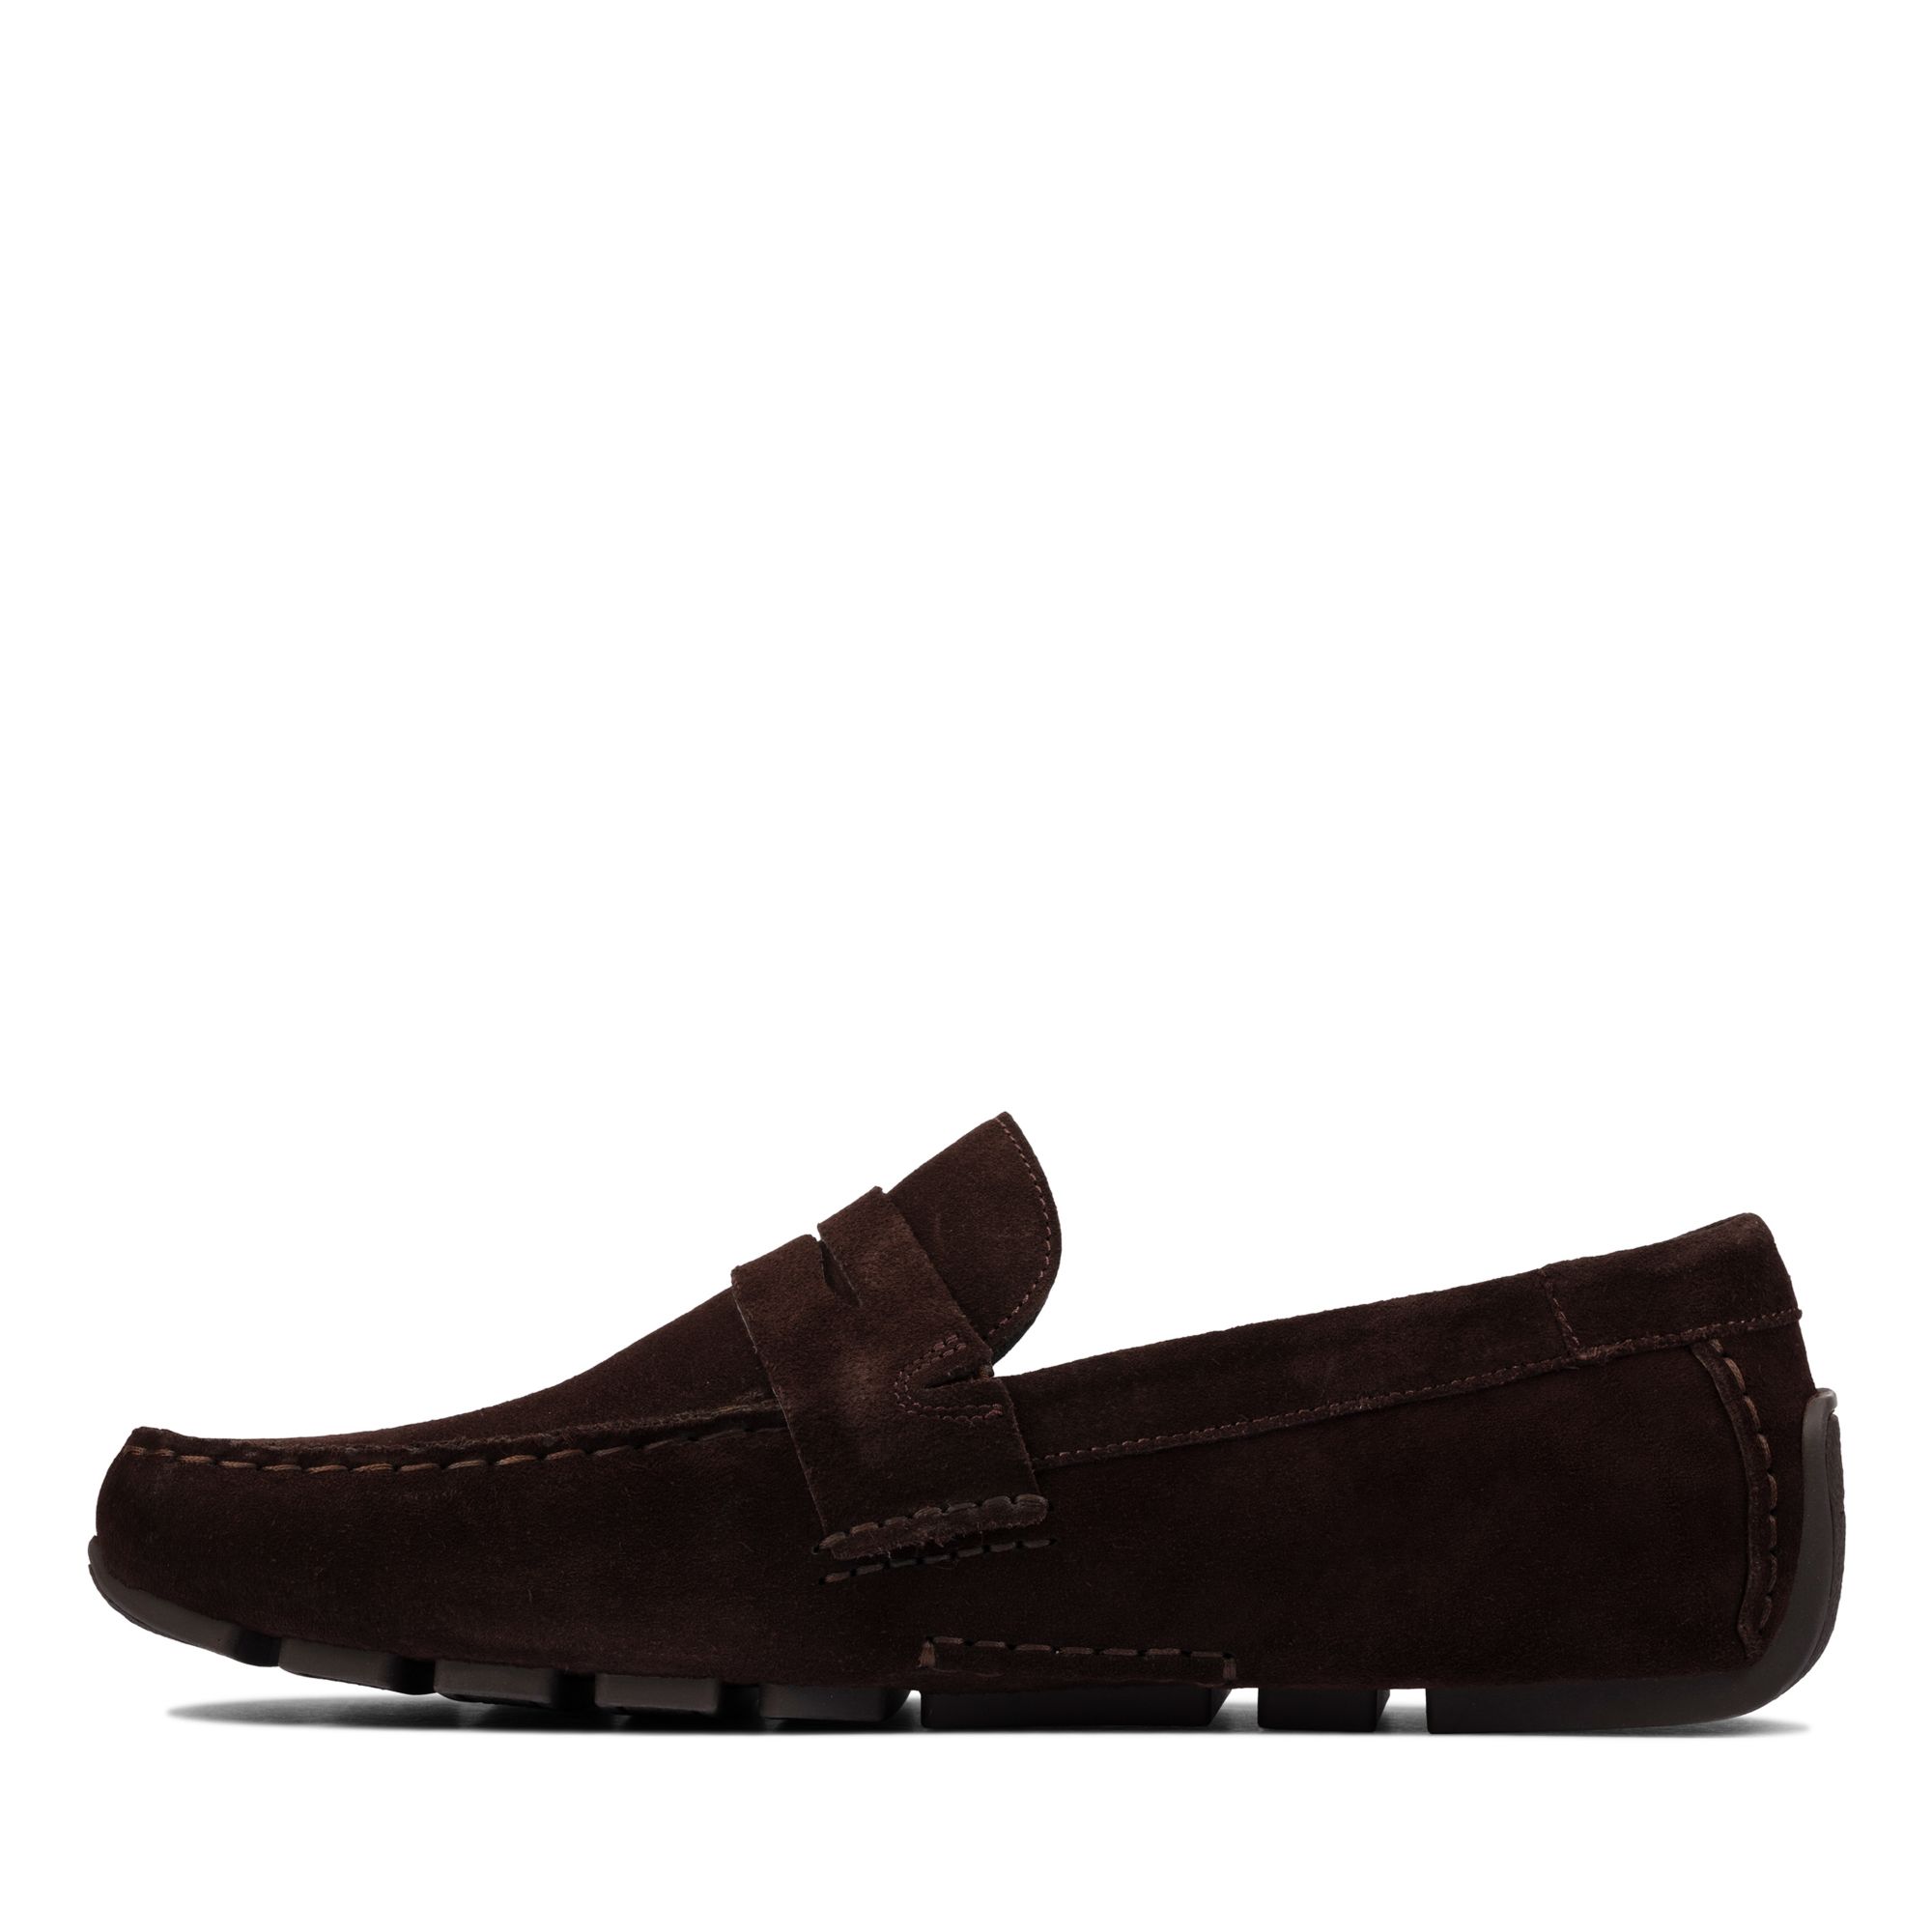 Clarks Oswick Penny Loafers, Dark Brown Suede, 44.5